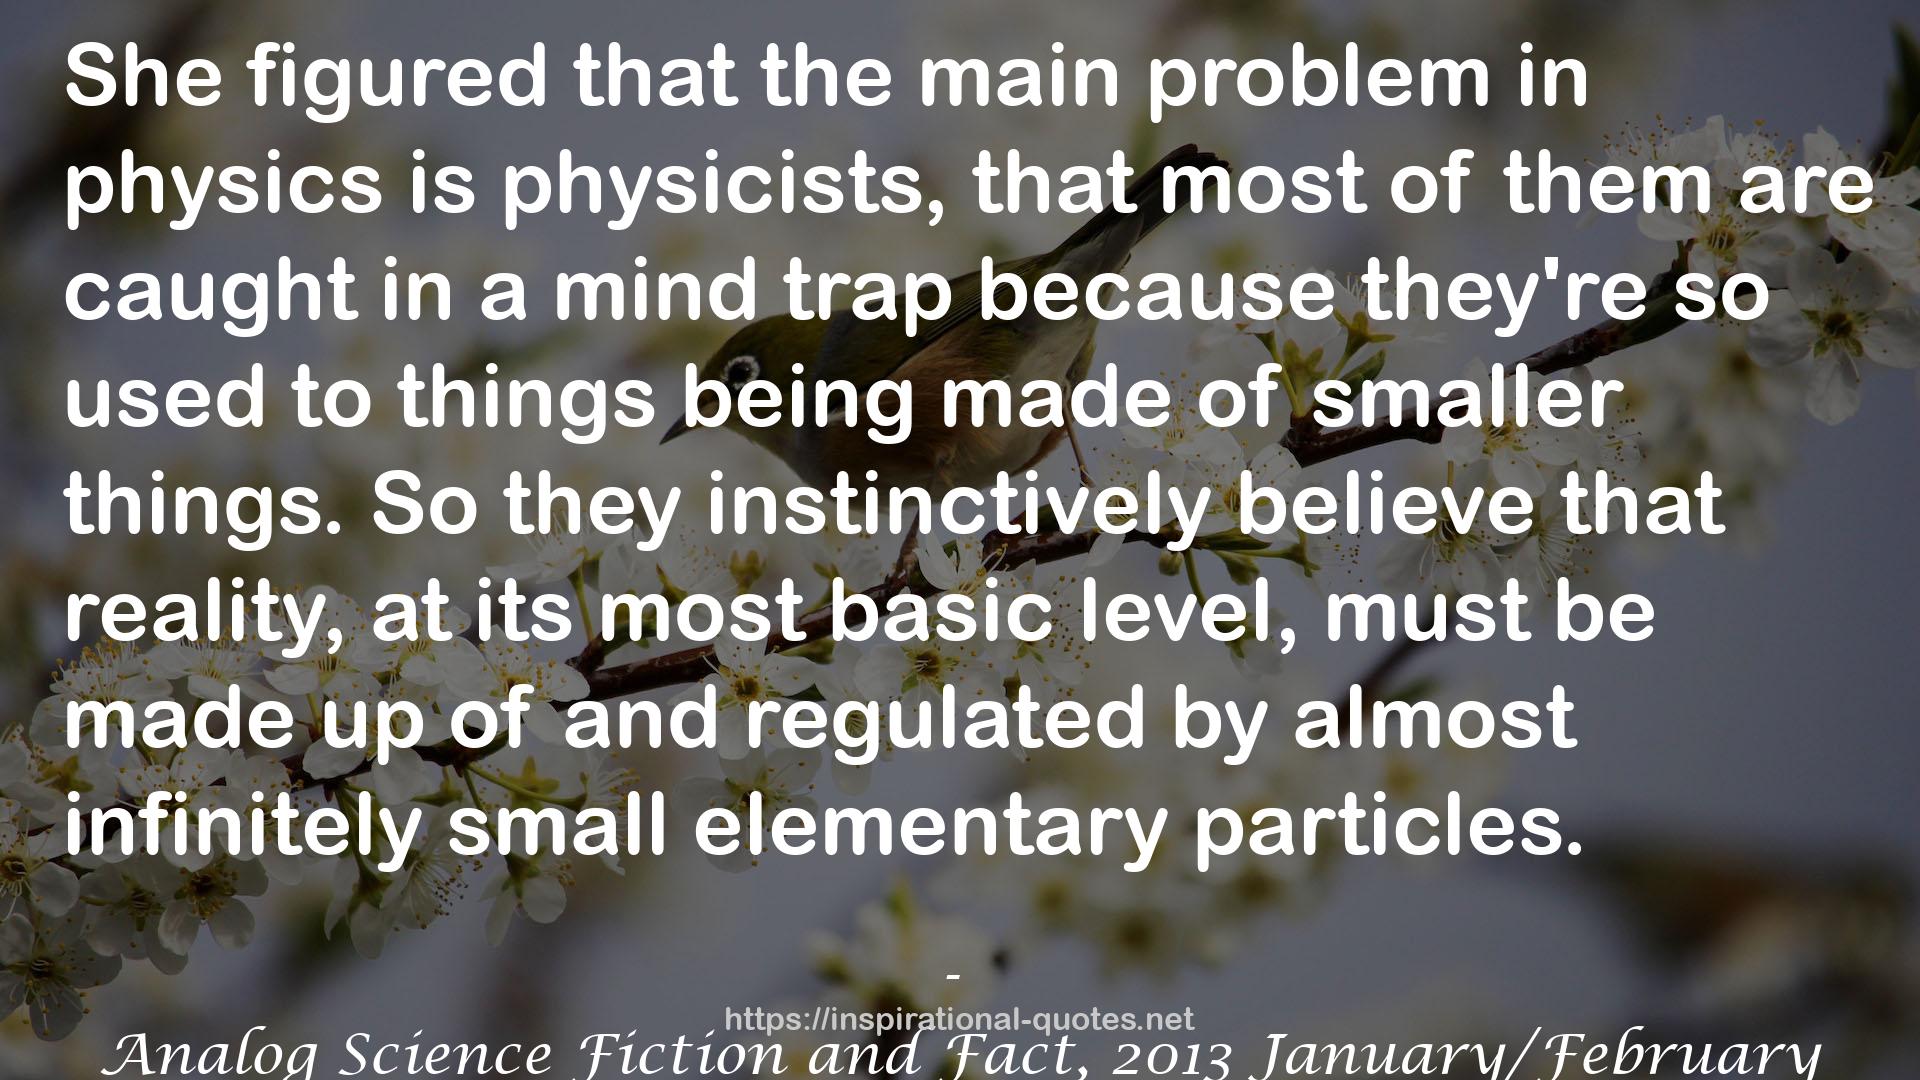 Analog Science Fiction and Fact, 2013 January/February QUOTES